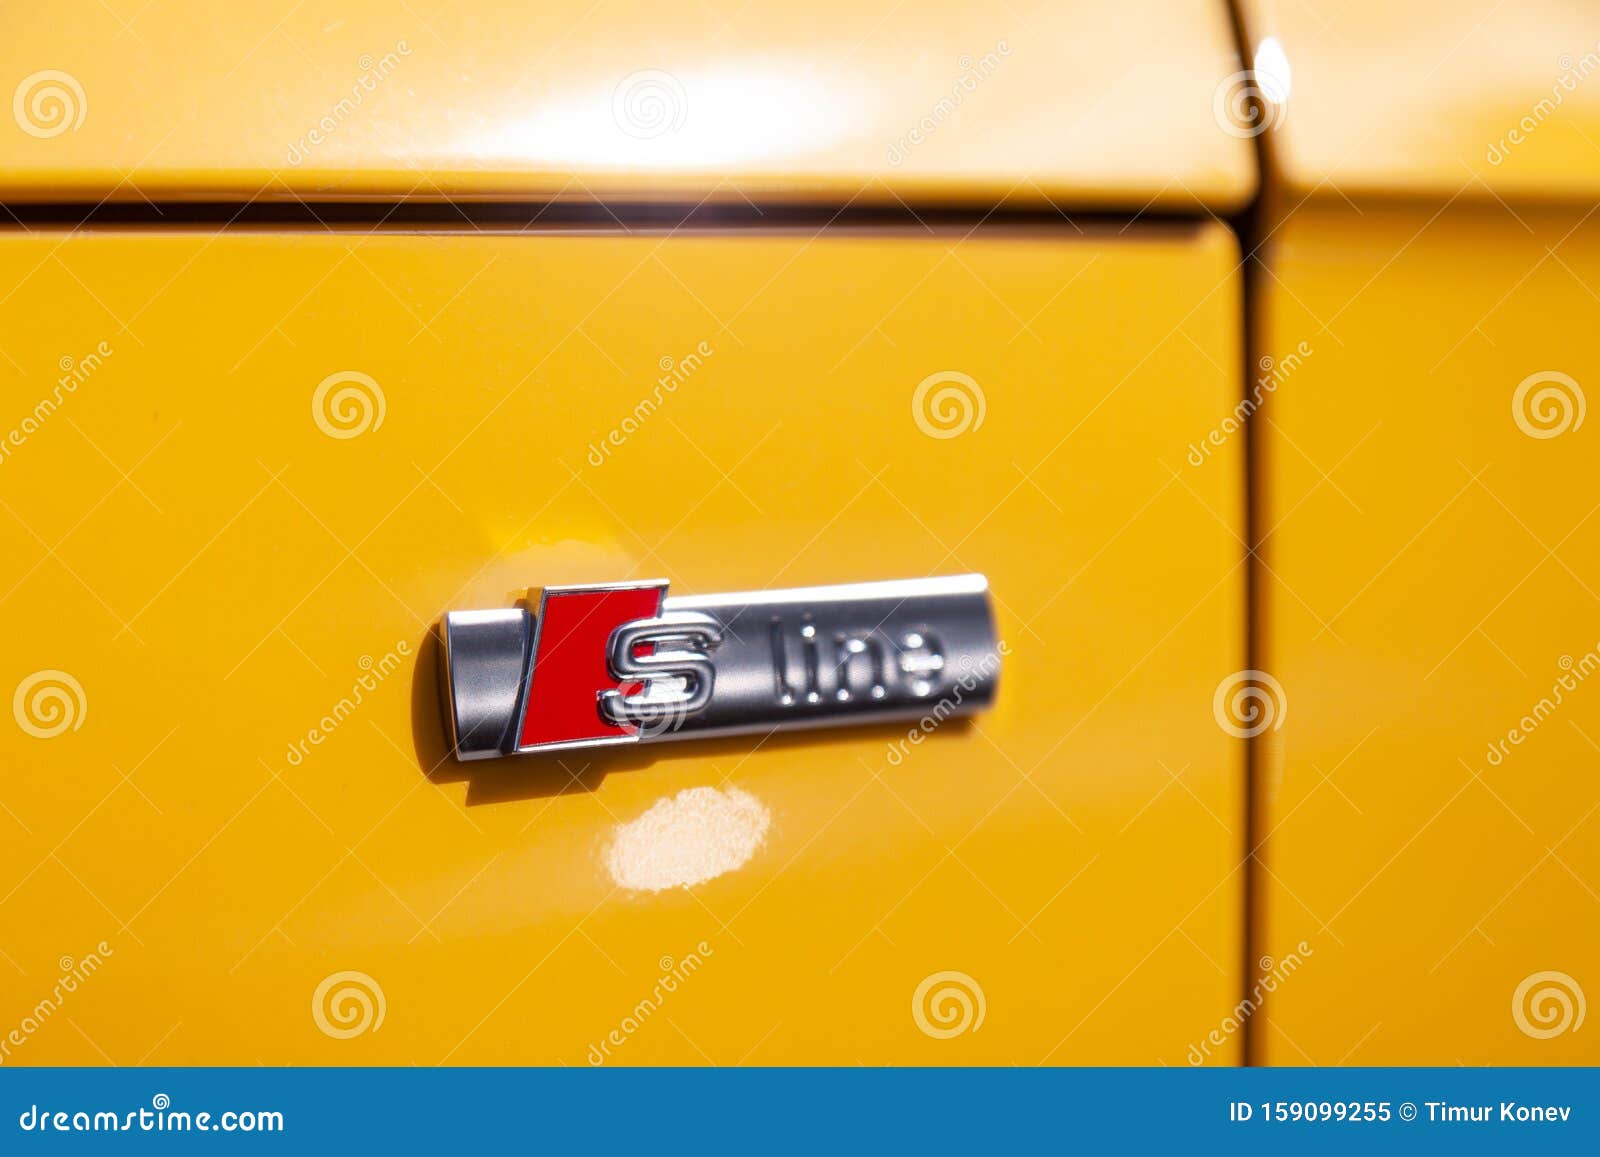 Russia Moscow 2019-06-17 Closeup Emblem on the Back of Audi TT S Line Brand  Logo on Yellow Car Editorial Photo - Image of modern, closeup: 164936111